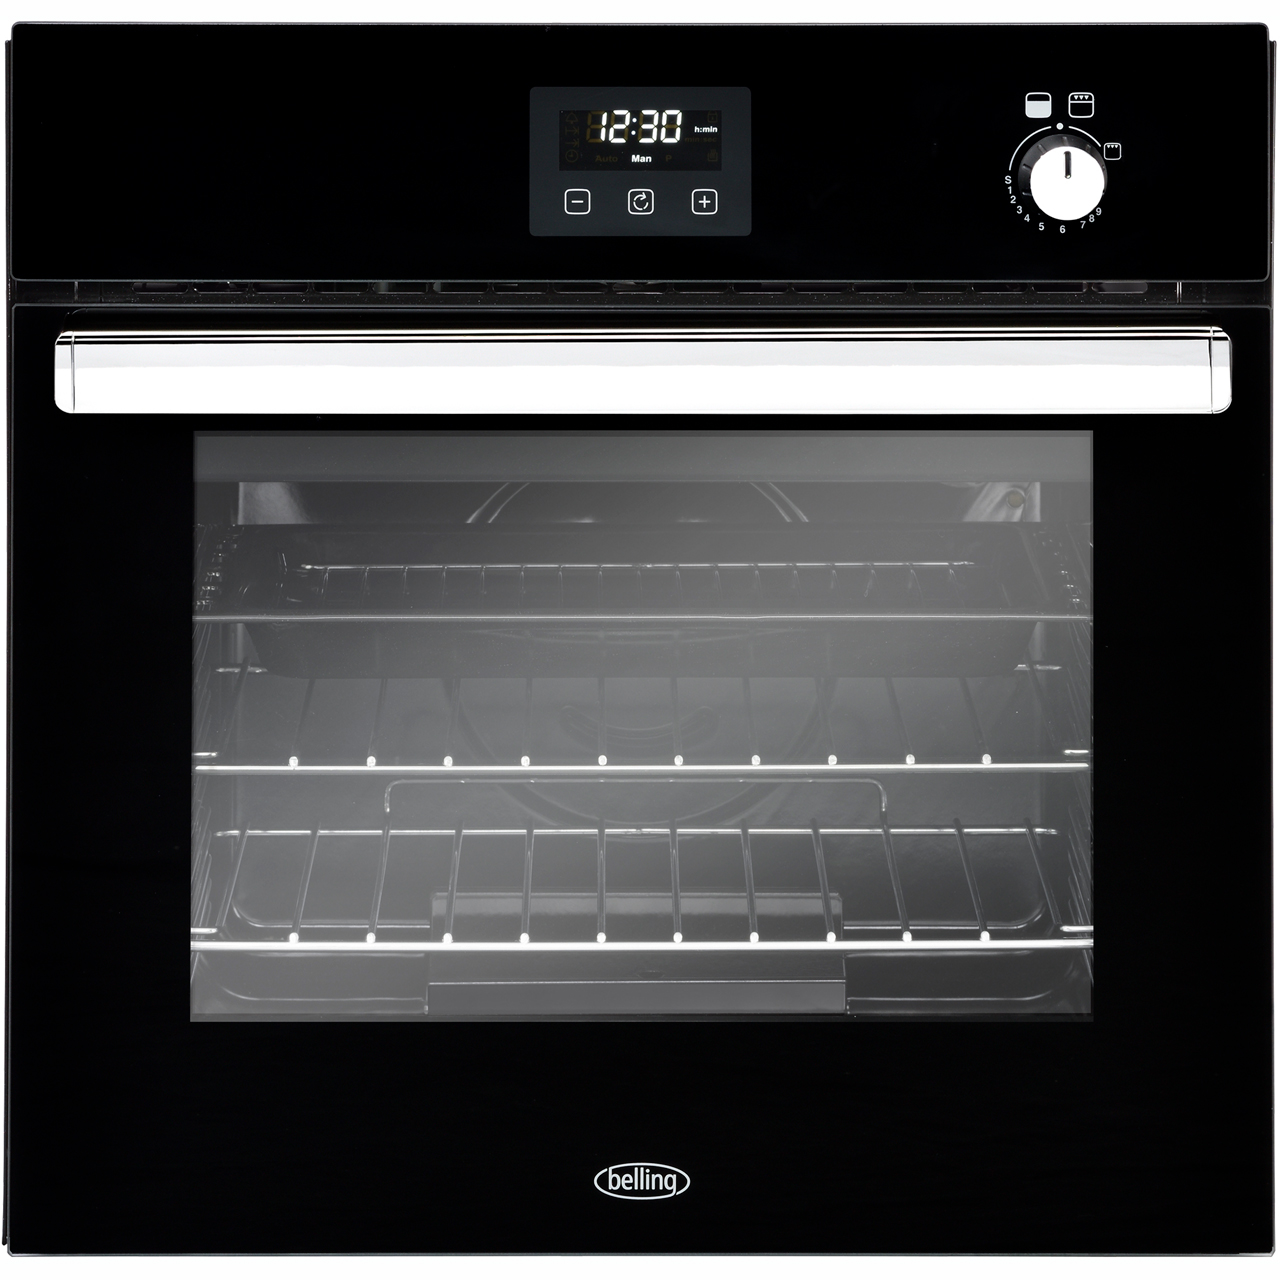 Belling BI602G Built In Gas Single Oven with Full Width Electric Grill - Black - A Rated, Black